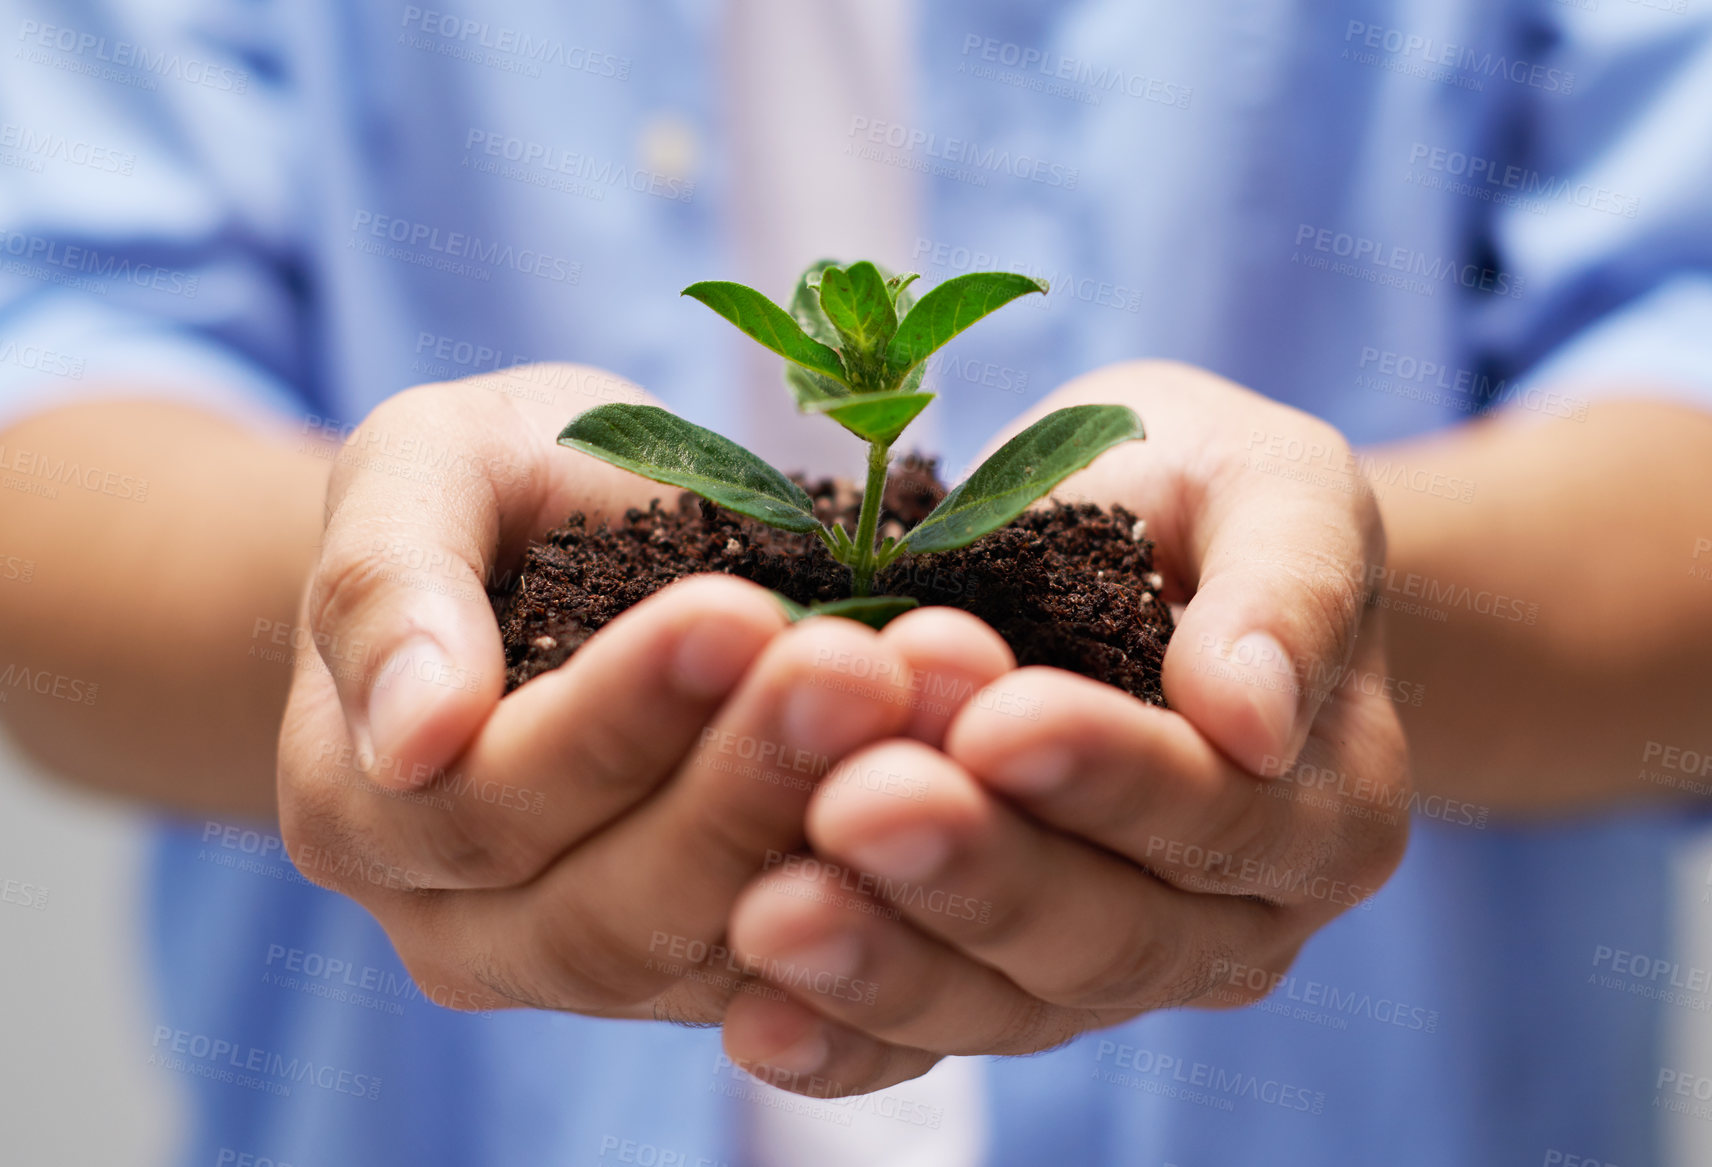 Buy stock photo Holding plant, hands and soil with person for growth, development and sustainability in agriculture. Fertilizer, dirt and environment with sapling for hope, future  and earth day or climate change